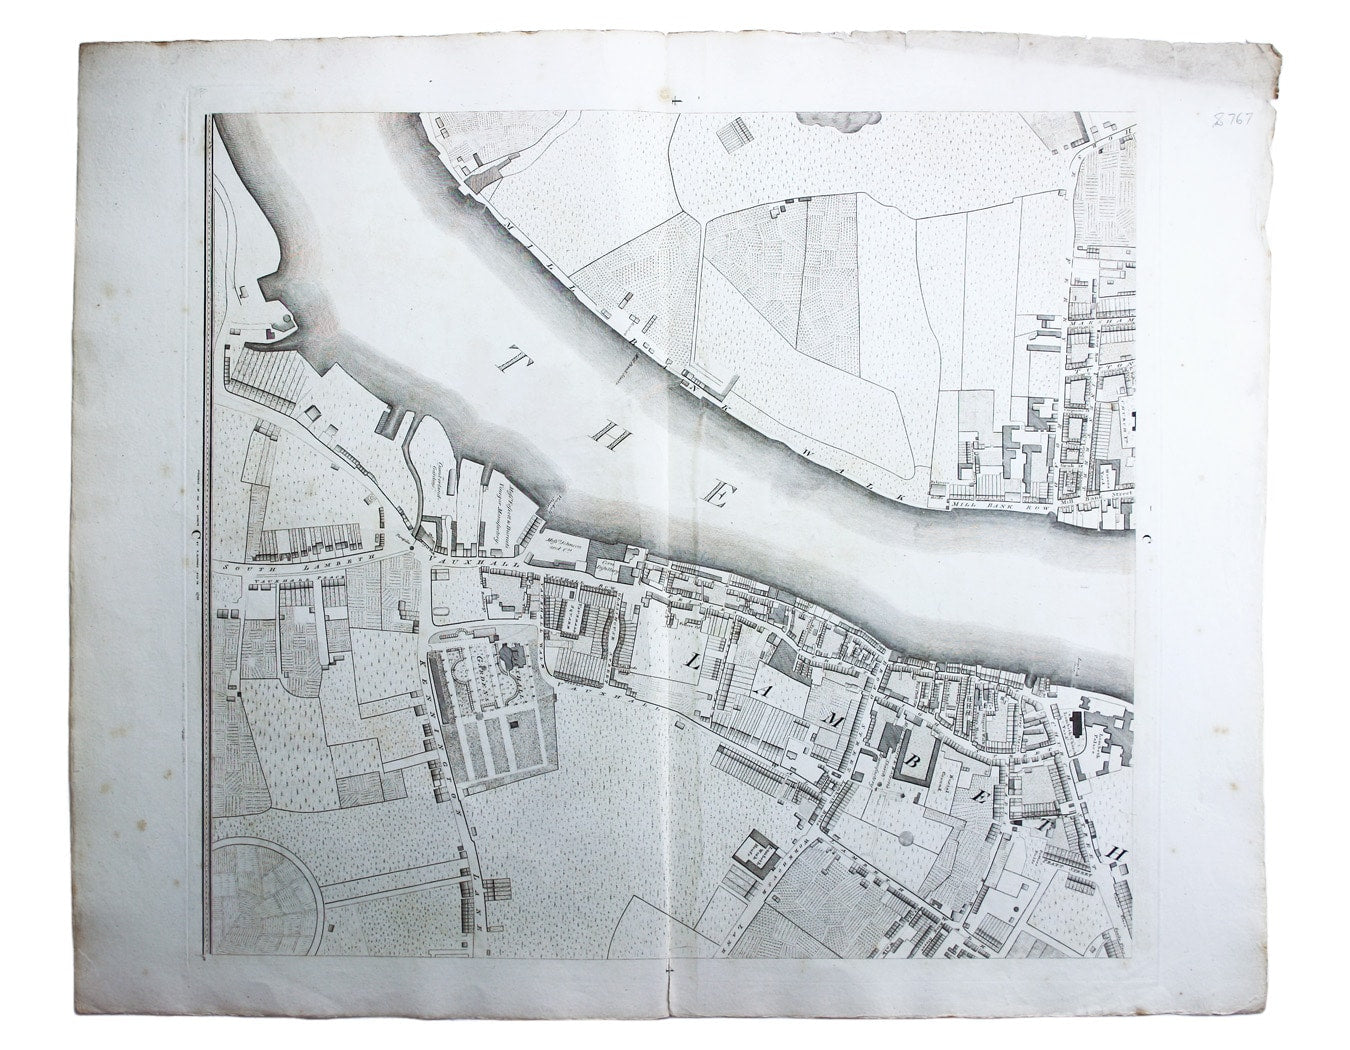 Horwood’s Plan of the Cities of London & Westminster – Sheet C4